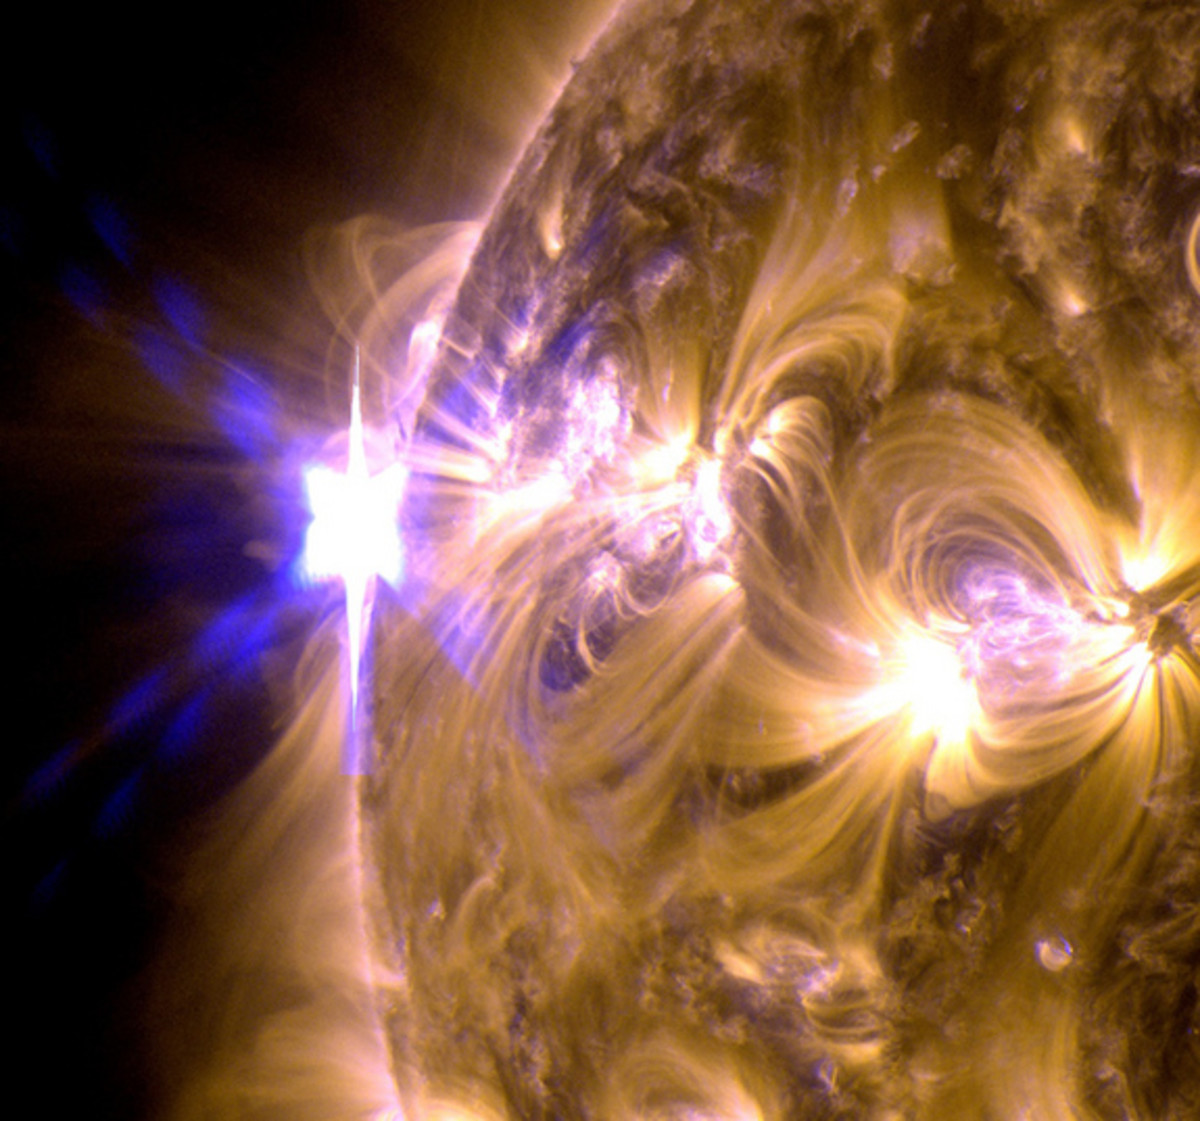 A close-up of an an X1.7-class solar flare on May 12, 2013 as seen by NASA’s Solar Dynamics Observatory. The Sun gets active! On May 12, 2013, the Sun emitted what NASA called a “significant” solar flare, classified as an X1.7, making it the first X-